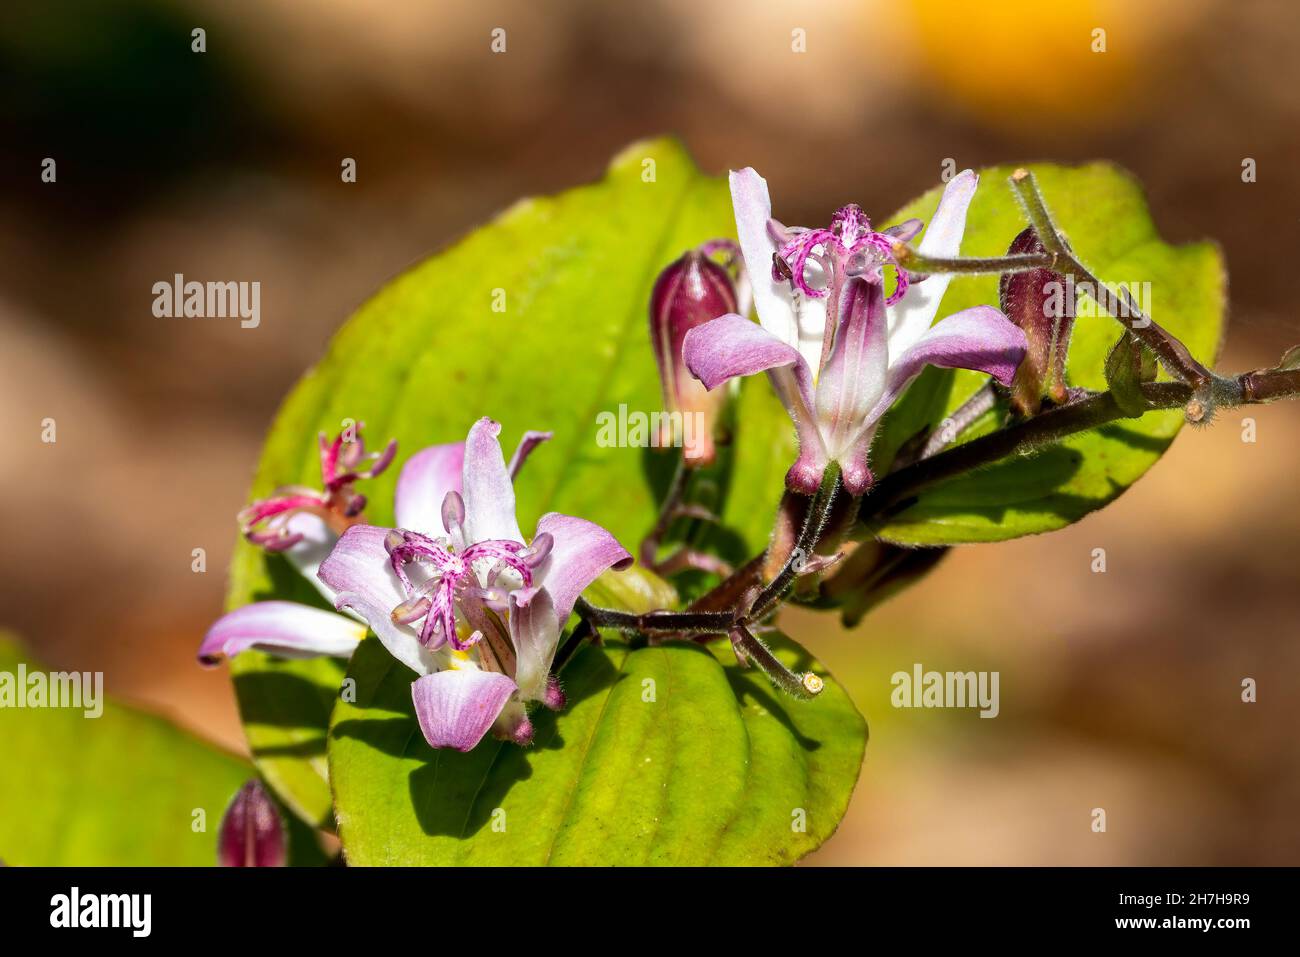 Tricyrtis hirta 'Tojen' a summer autumn fall flowering plant with a lilac purple summertime flower commonly known as Toad lily or Japanese Orchid Lily Stock Photo